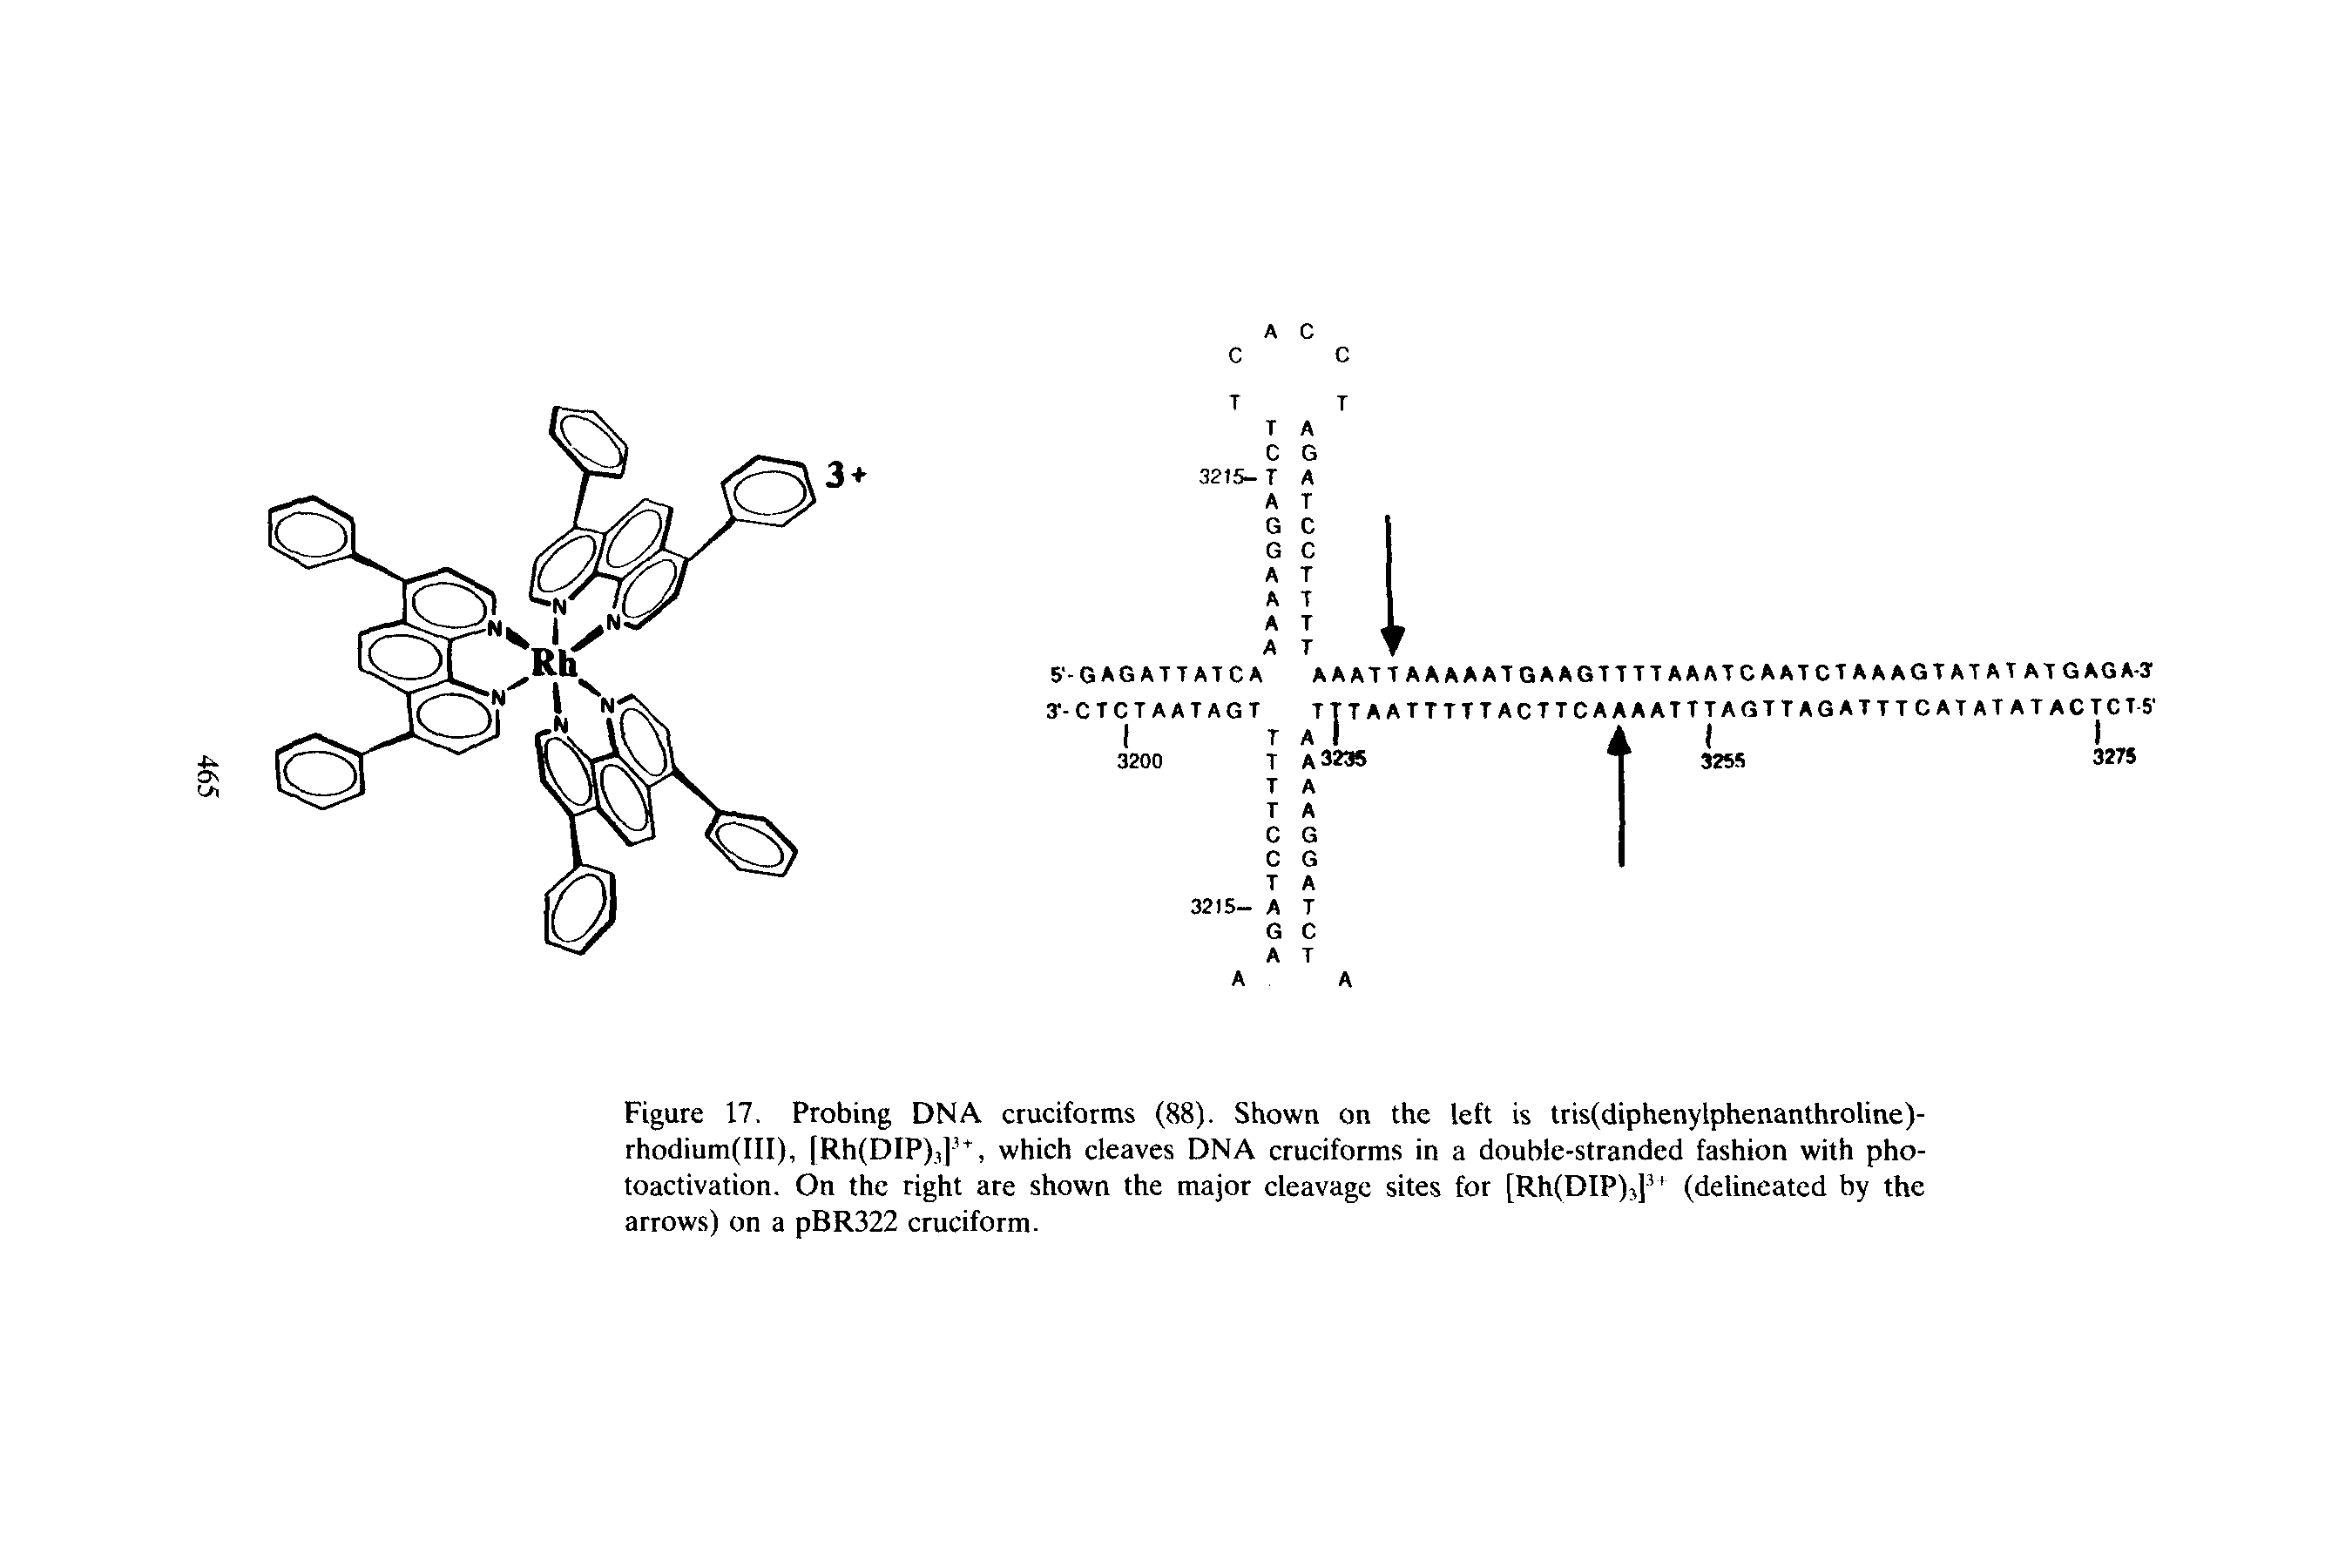 Figure 17. Probing DNA cruciforms (88). Shown on the left is tris(diphenylphenanthroline)-rhodium(III), [Rh(DIP),] , which cleaves DNA cruciforms in a double-stranded fashion with photoactivation. On the right are shown the major cleavage sites for [Rh(DIP),] (delineated by the arrows) on a pBR322 cruciform.